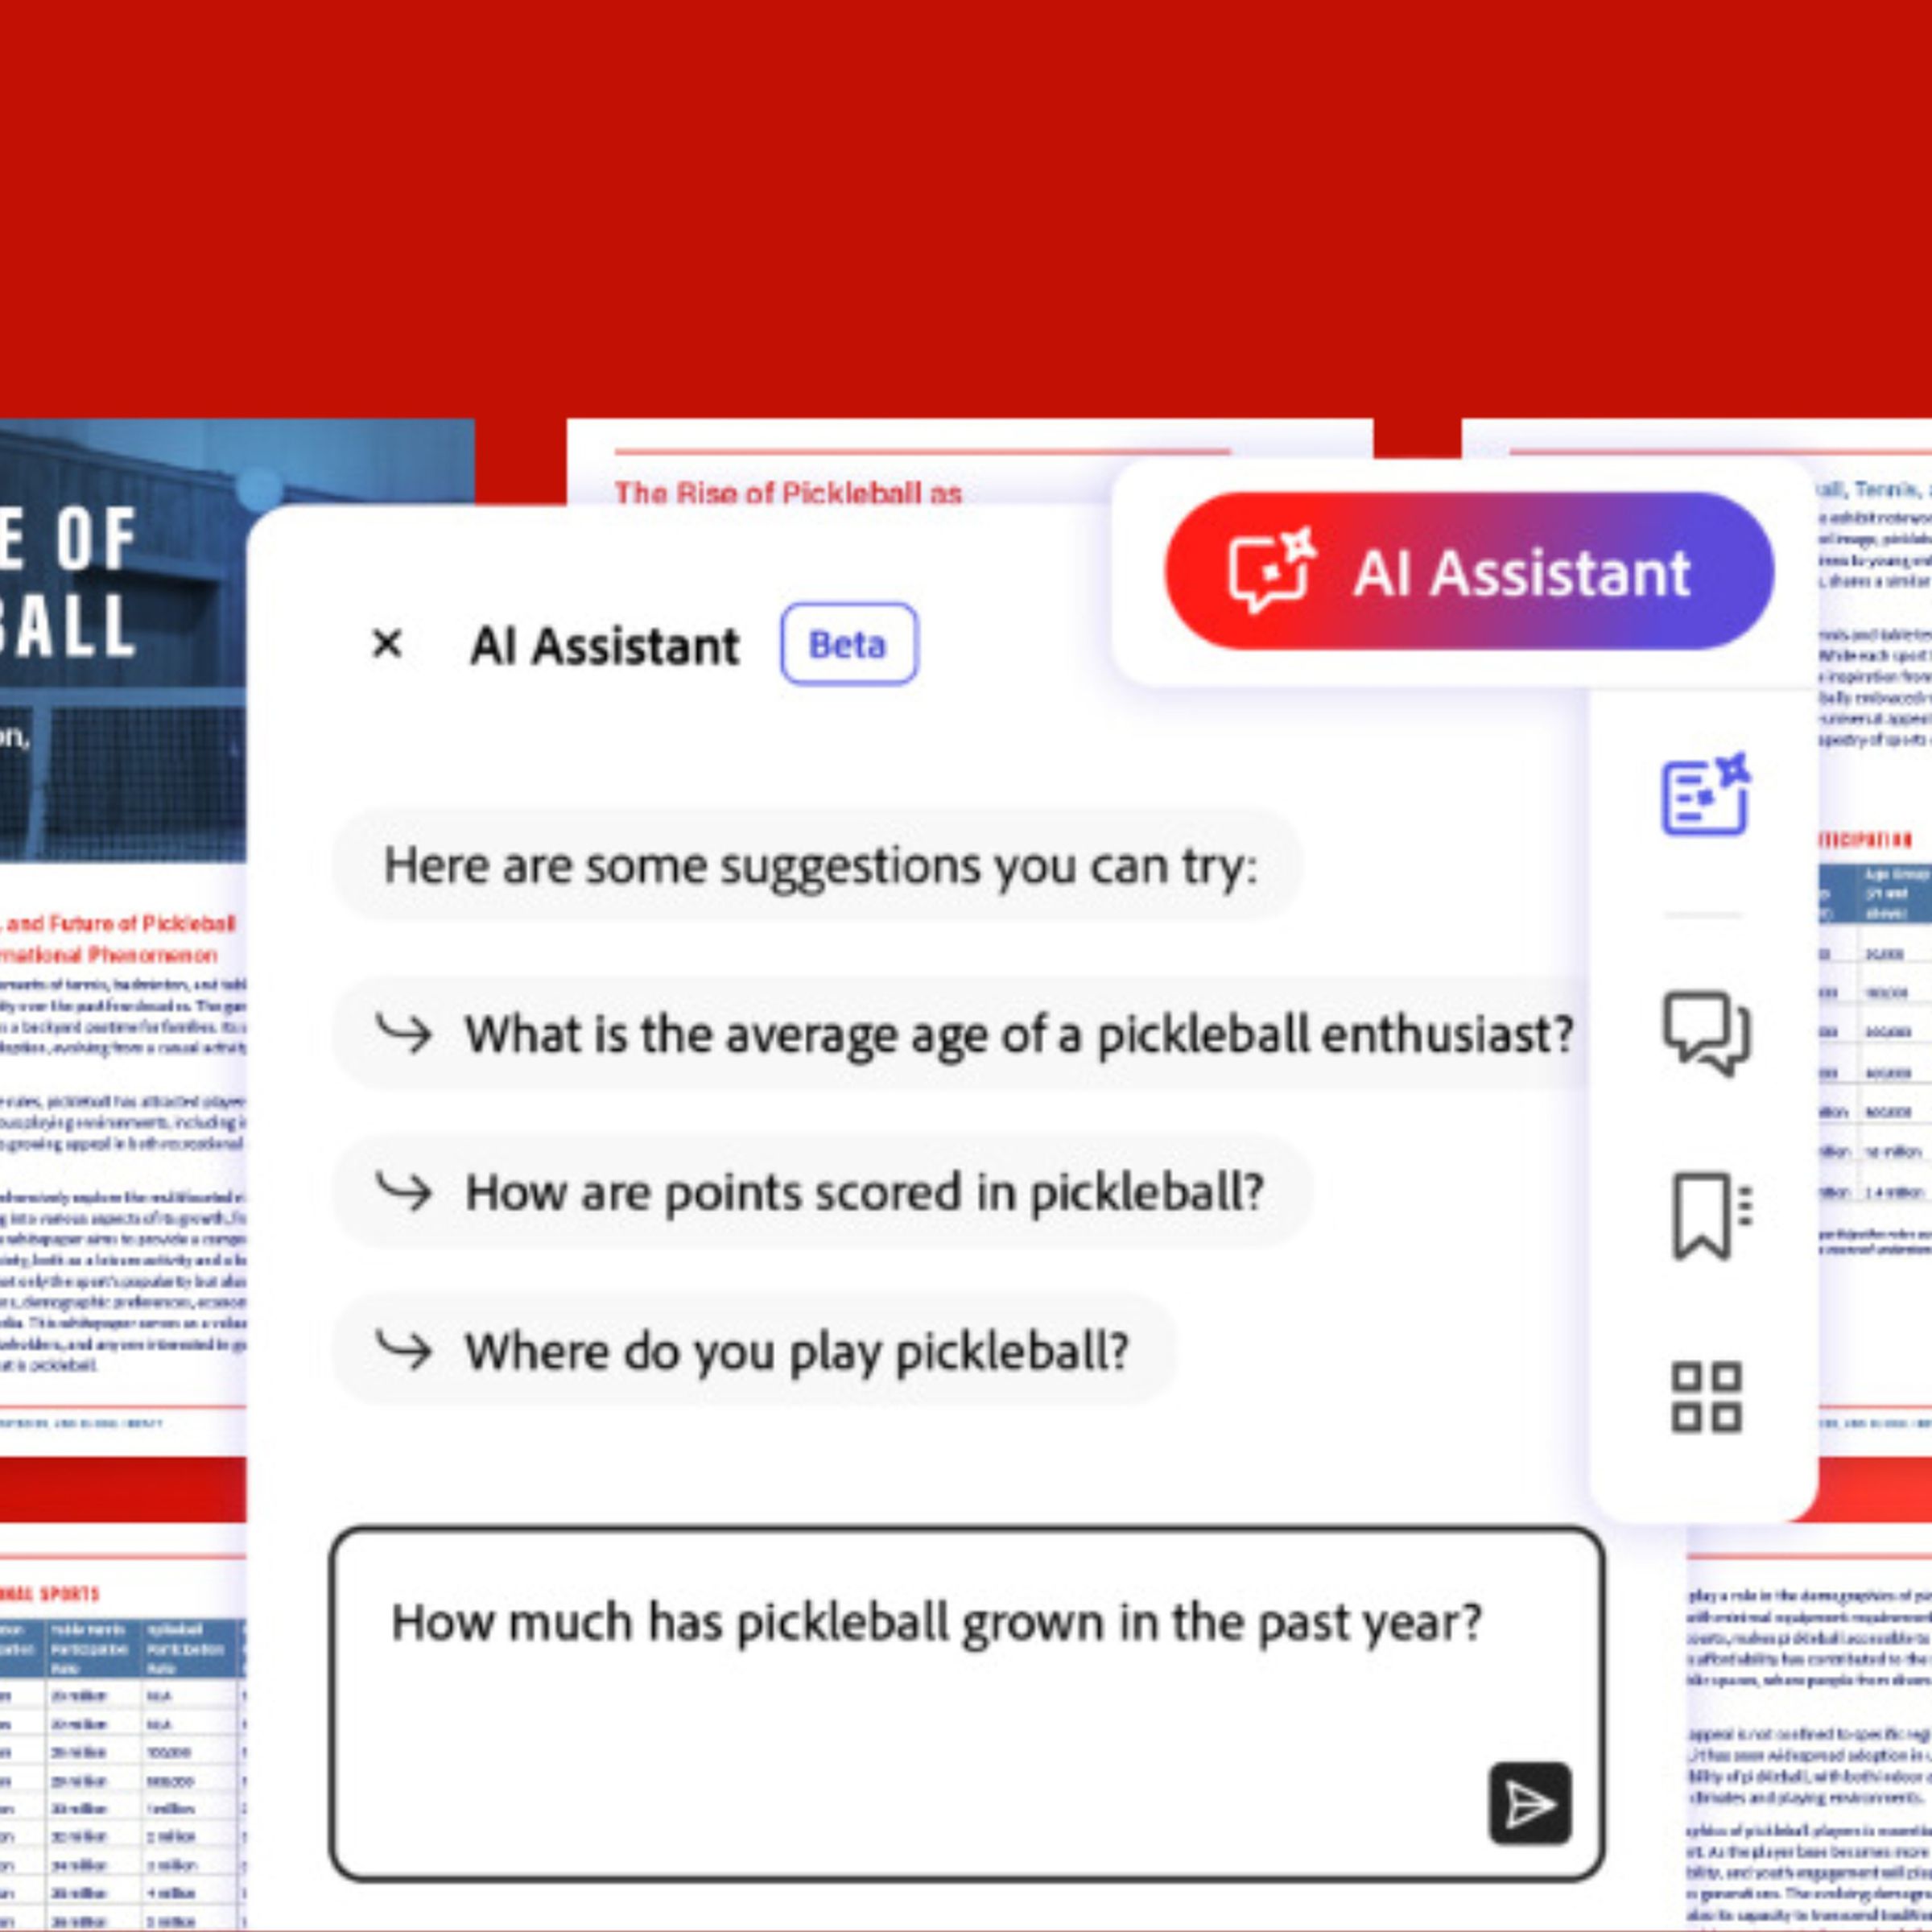 A screenshot taken of Adobe Acrobat’s AI Assistant suggesting questions about pickleball.